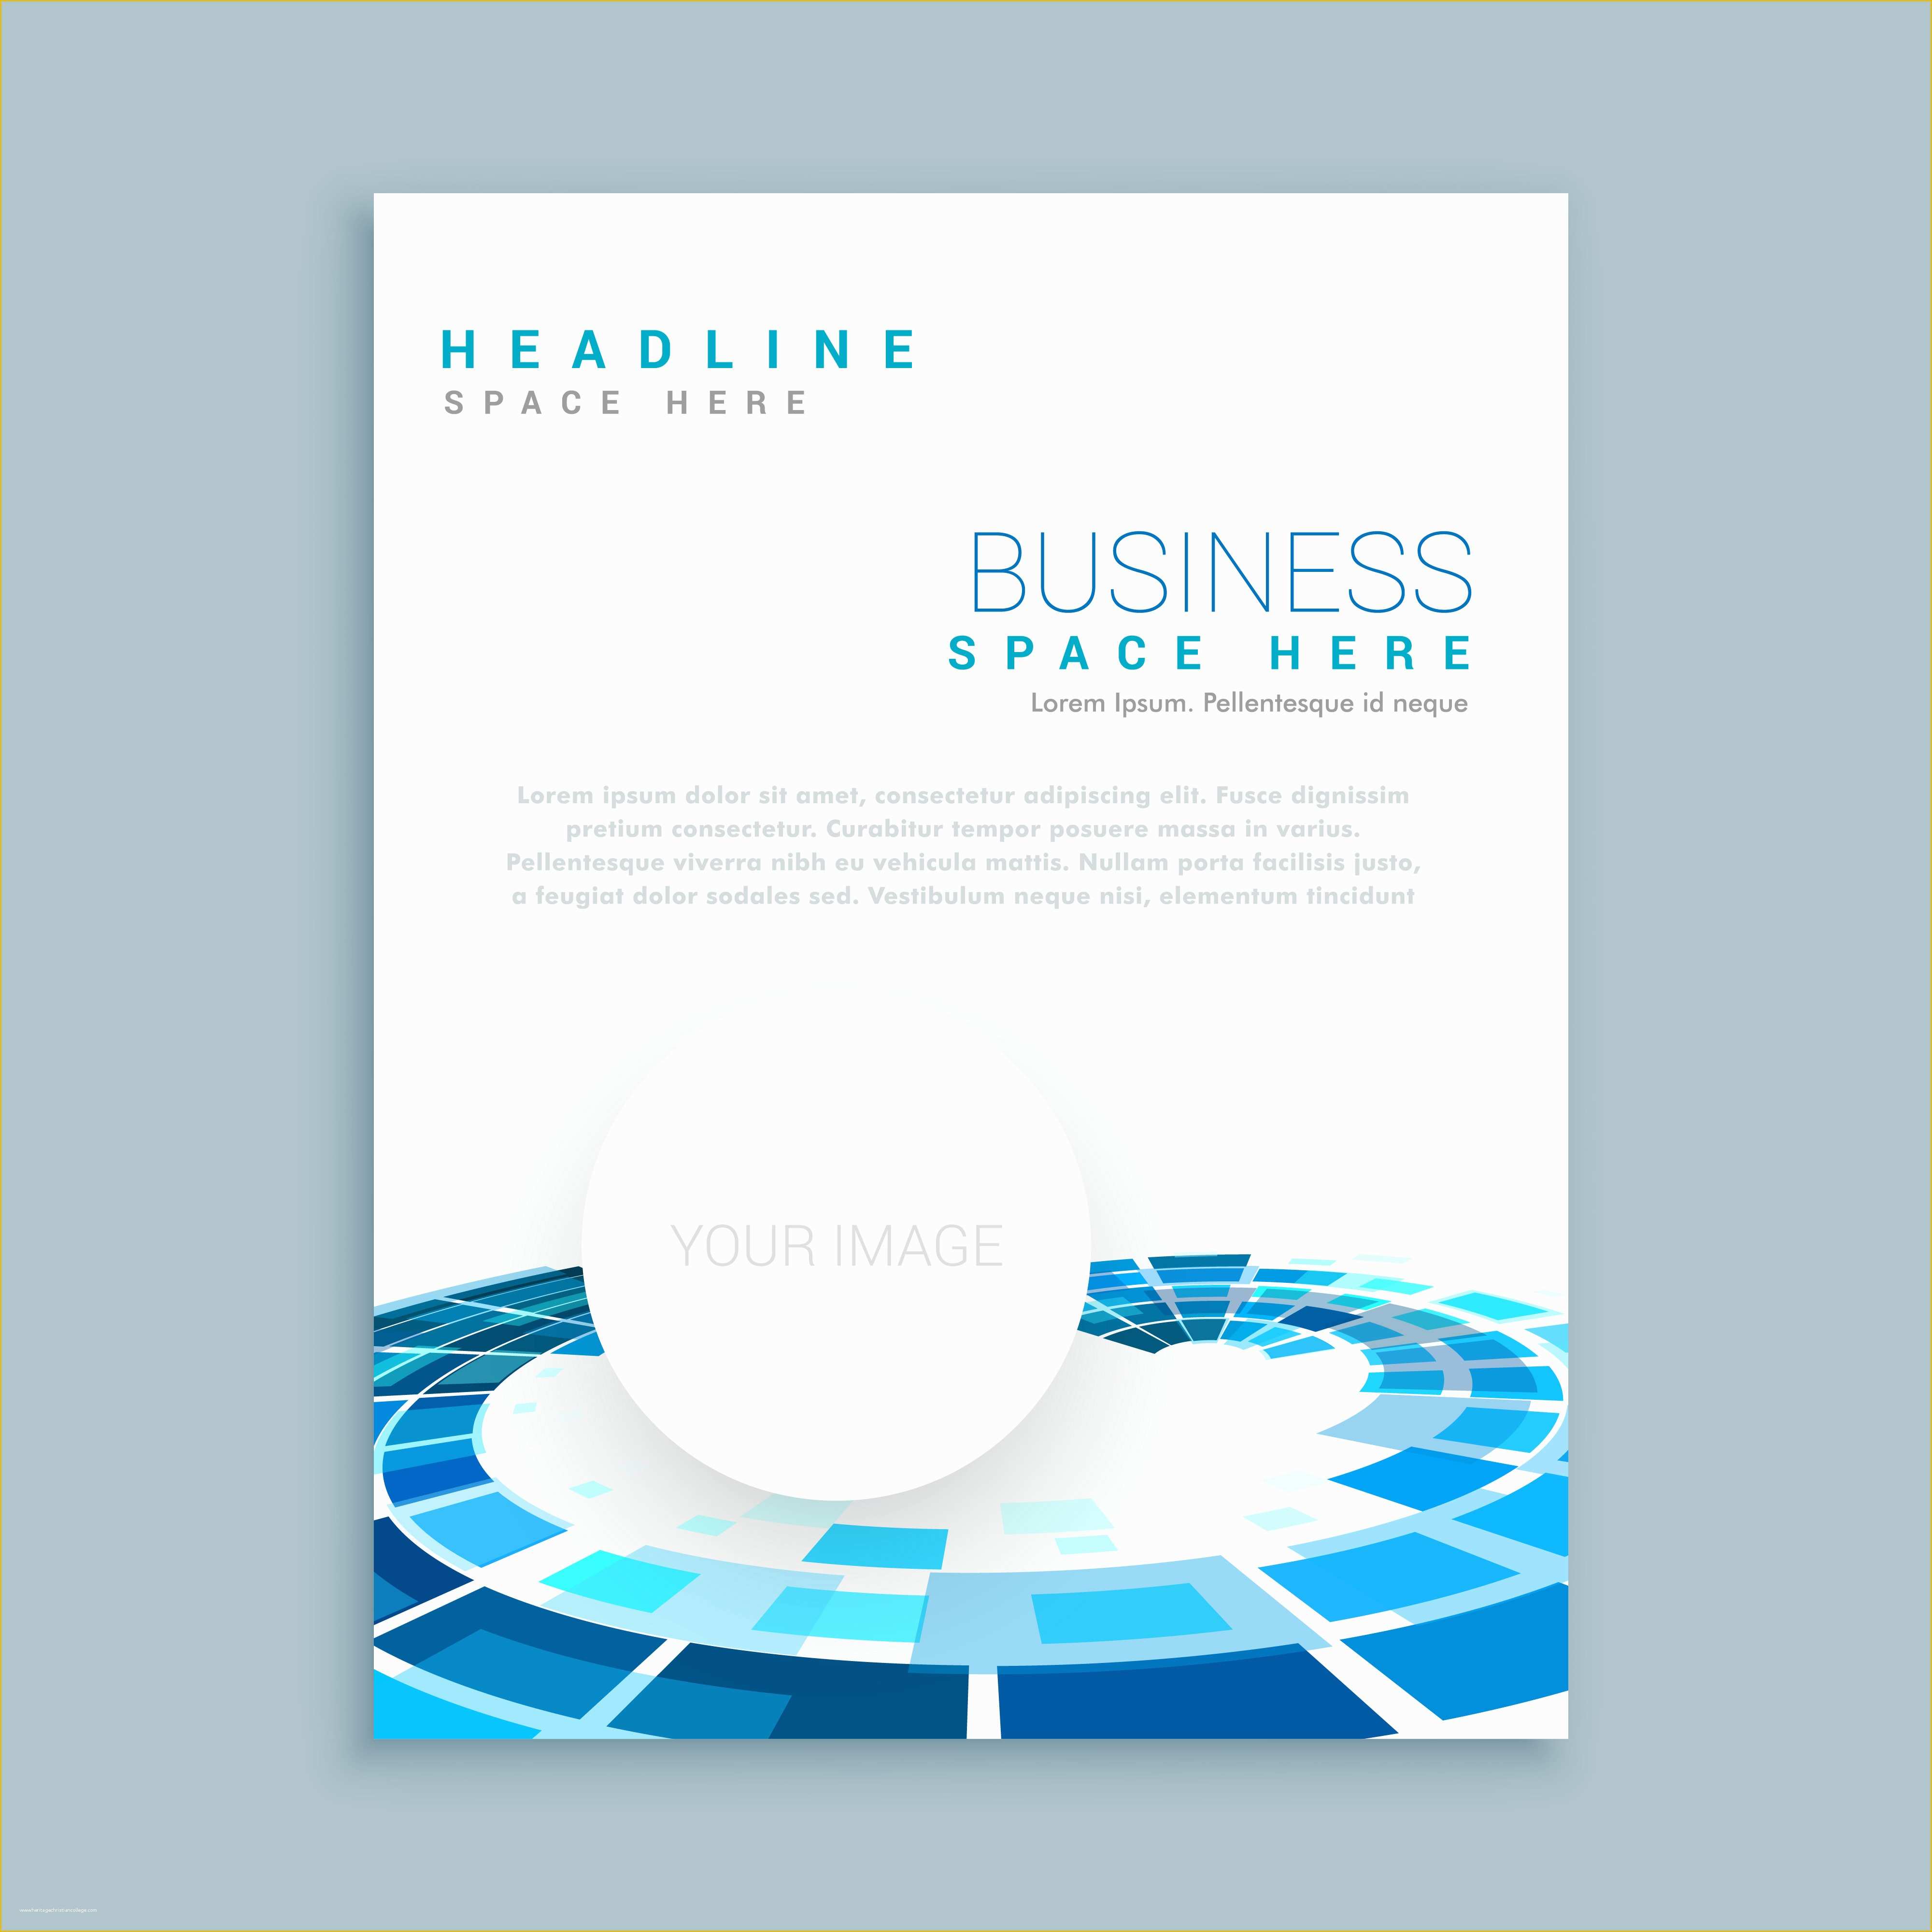 report cover page template word free download